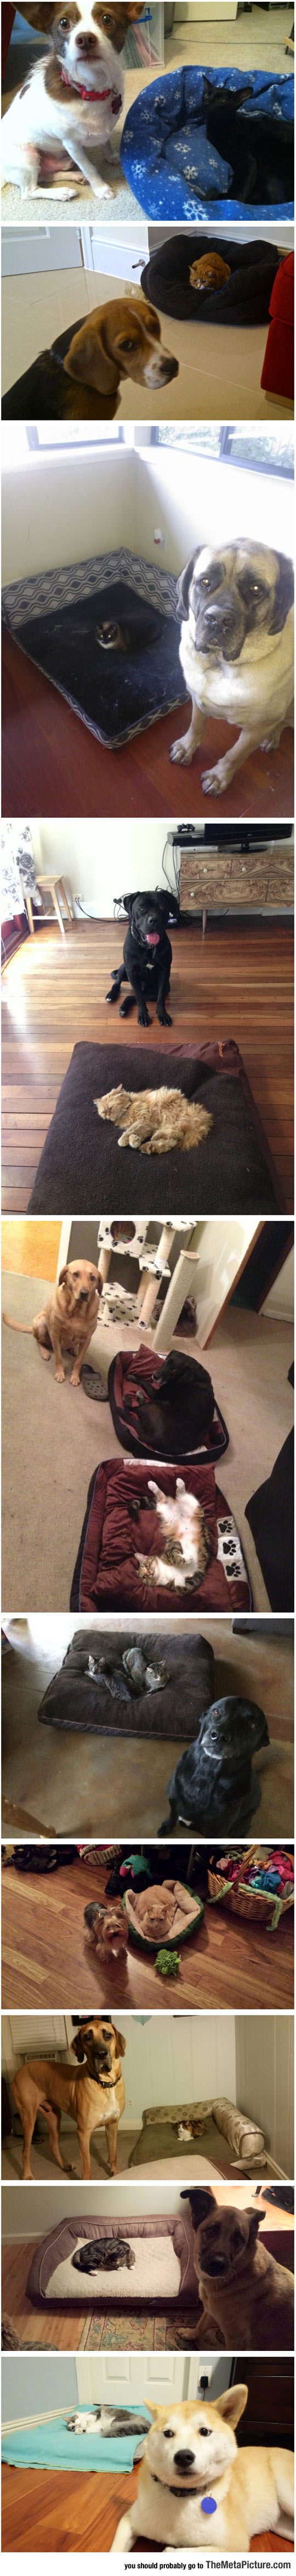 funny-cats-stealing-beds-dogs